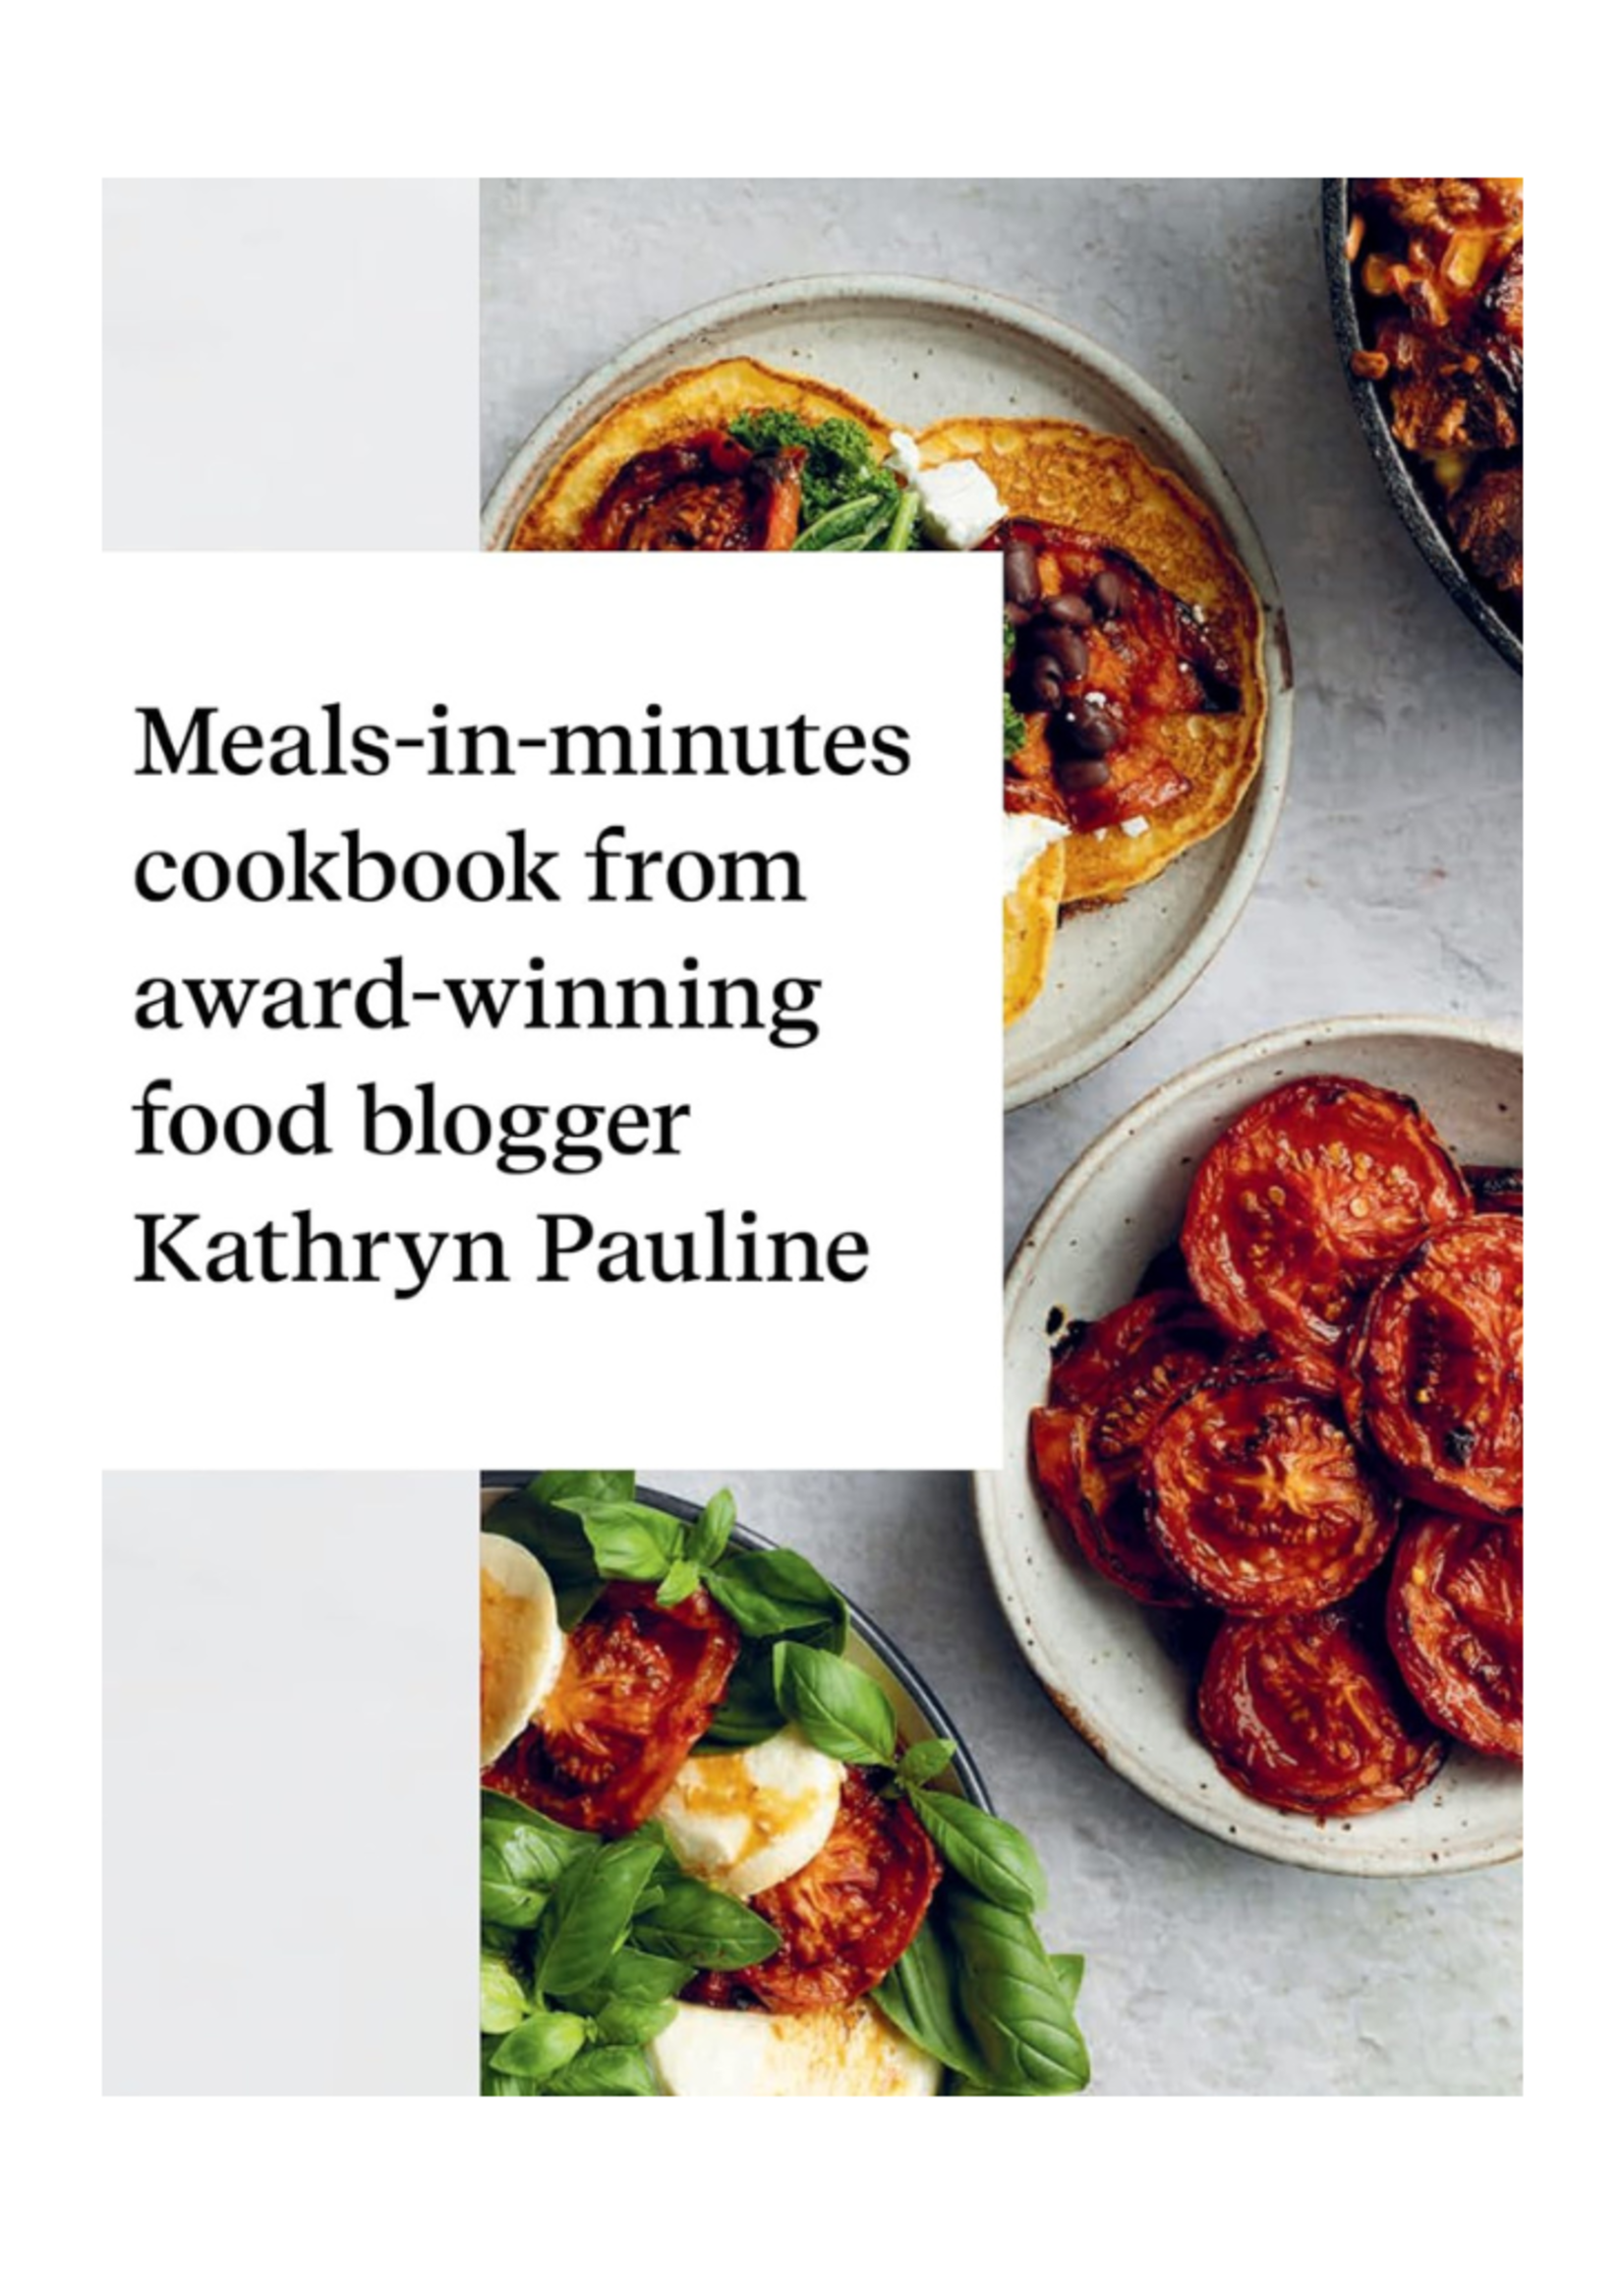 Chronicle Books Piecemeal: A Meal-Planning Repertoire with 120 Recipes to Make in 5+, 15+, or 30+ Minutes―30 Bold Ingredients and 90 Variations by Kathryn Pauline